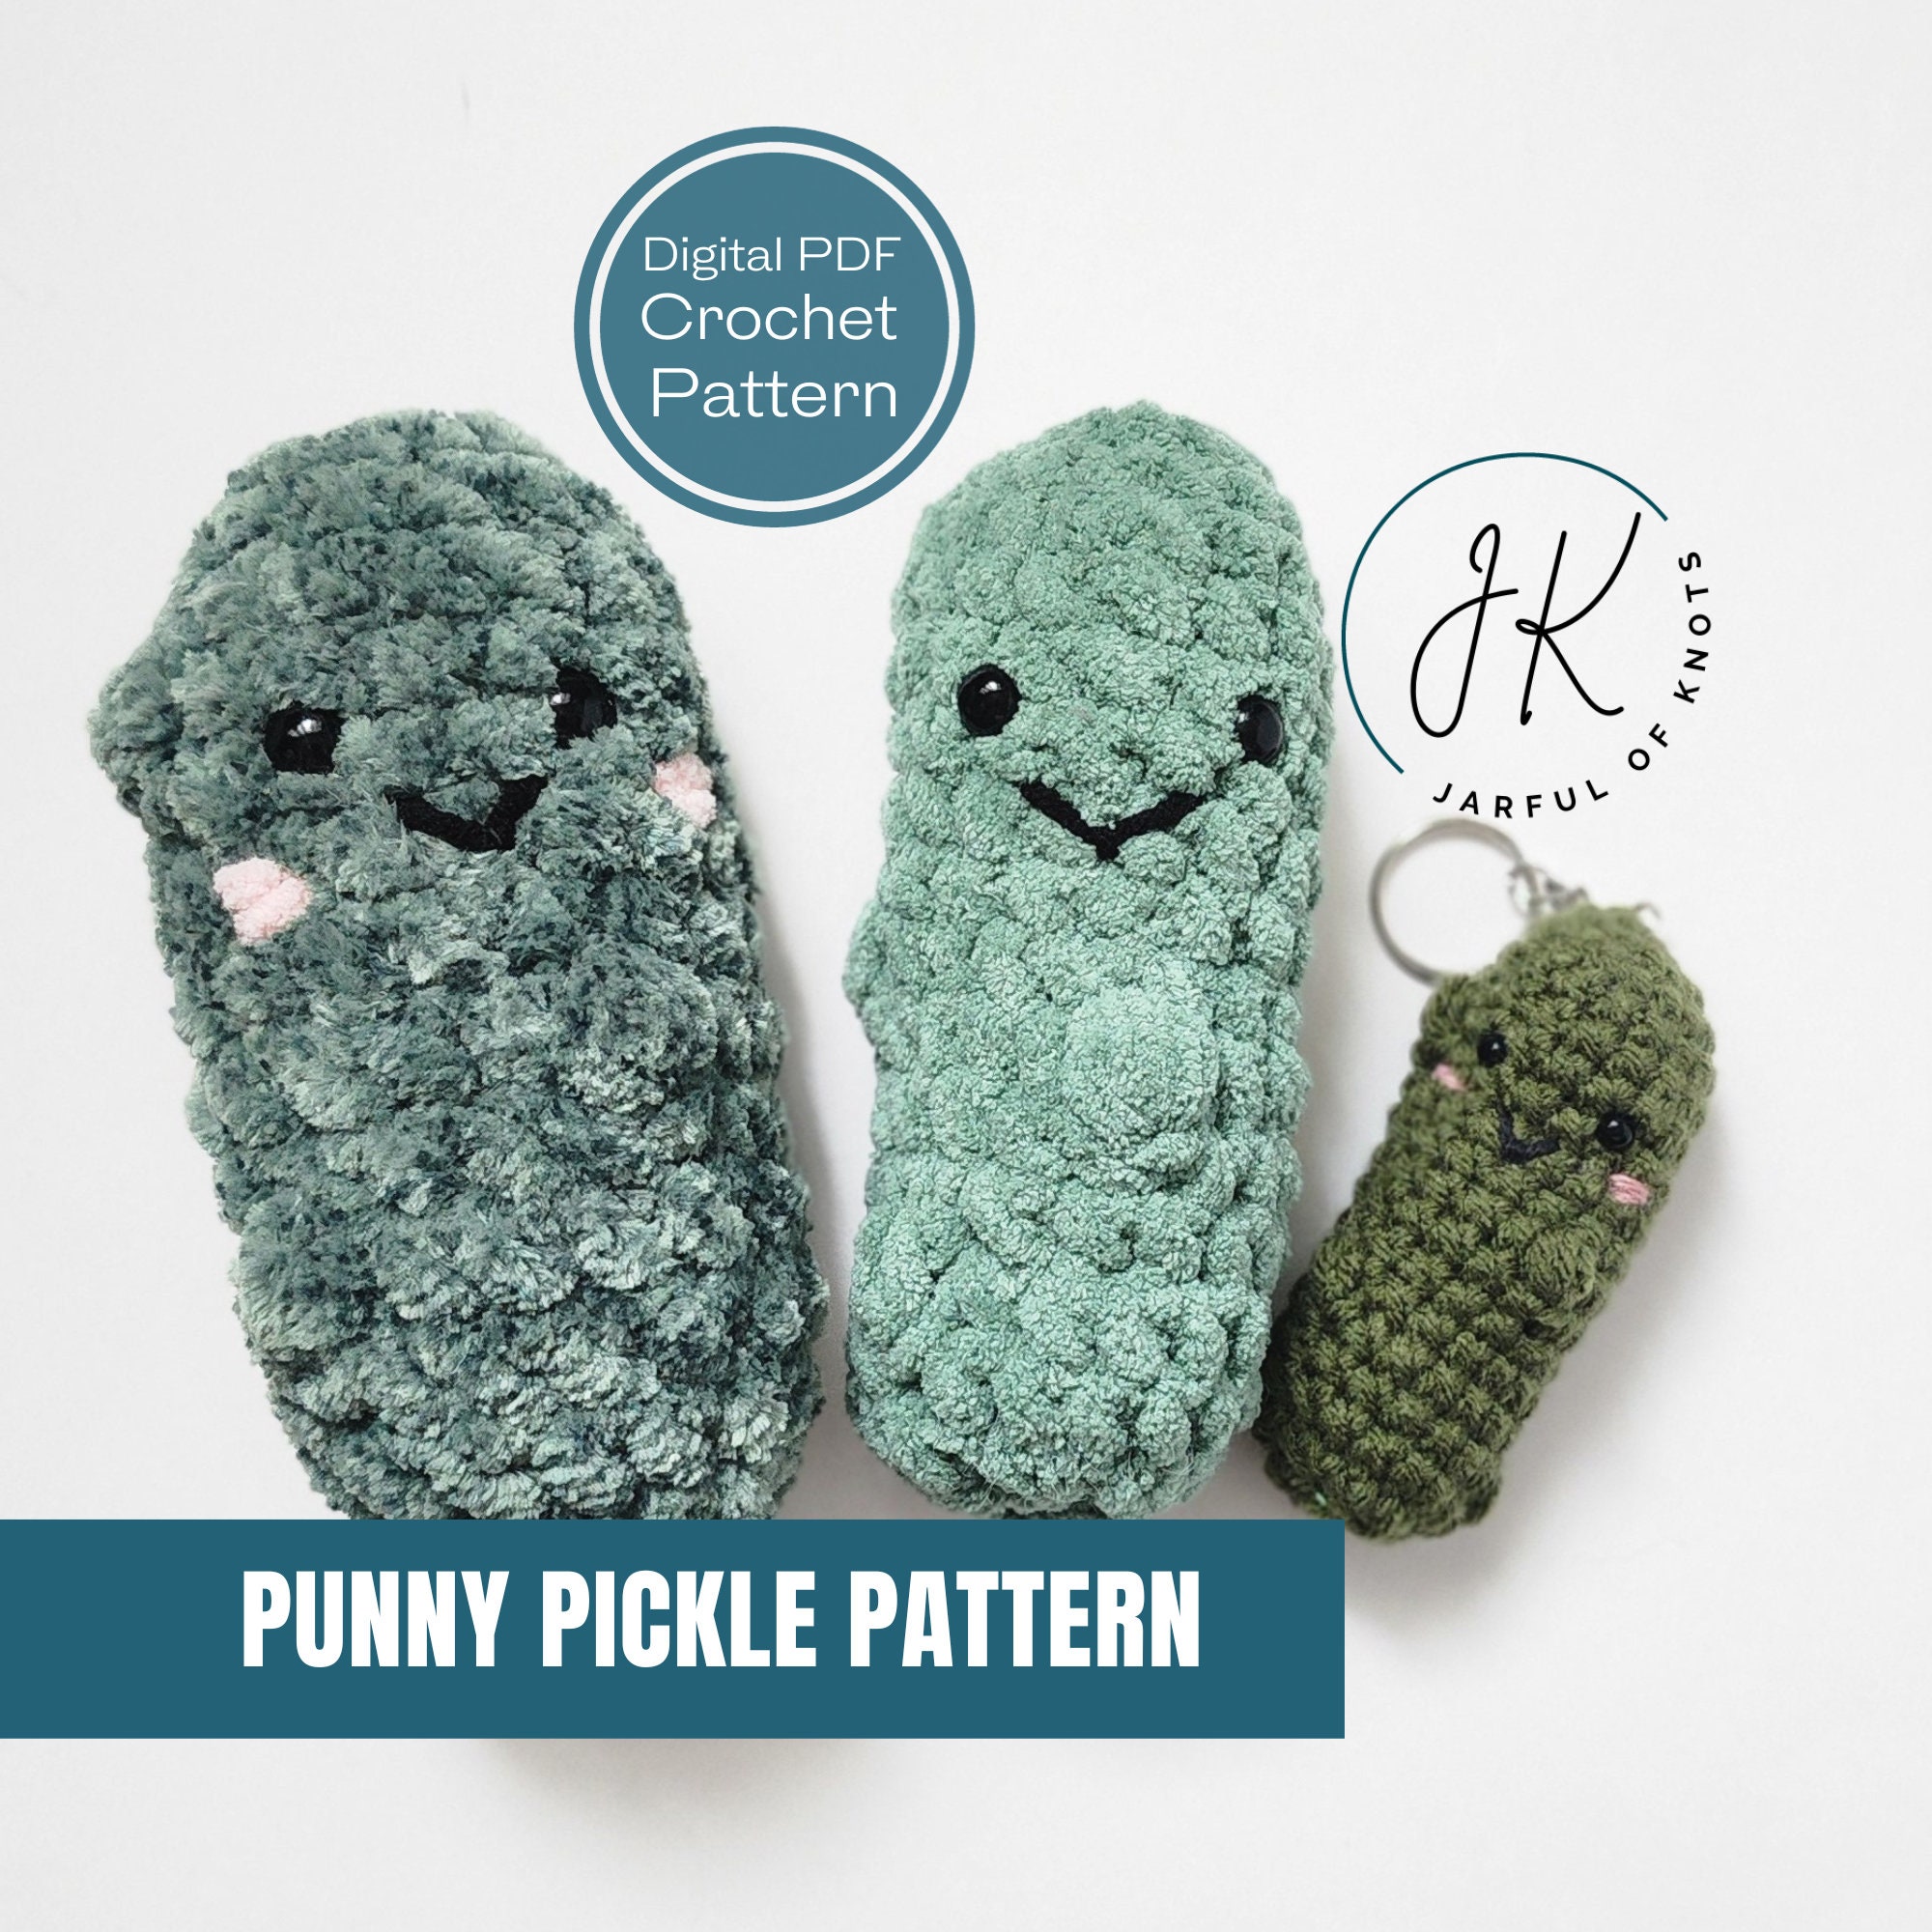 Emotional Support pickle No Sew: Crochet pattern